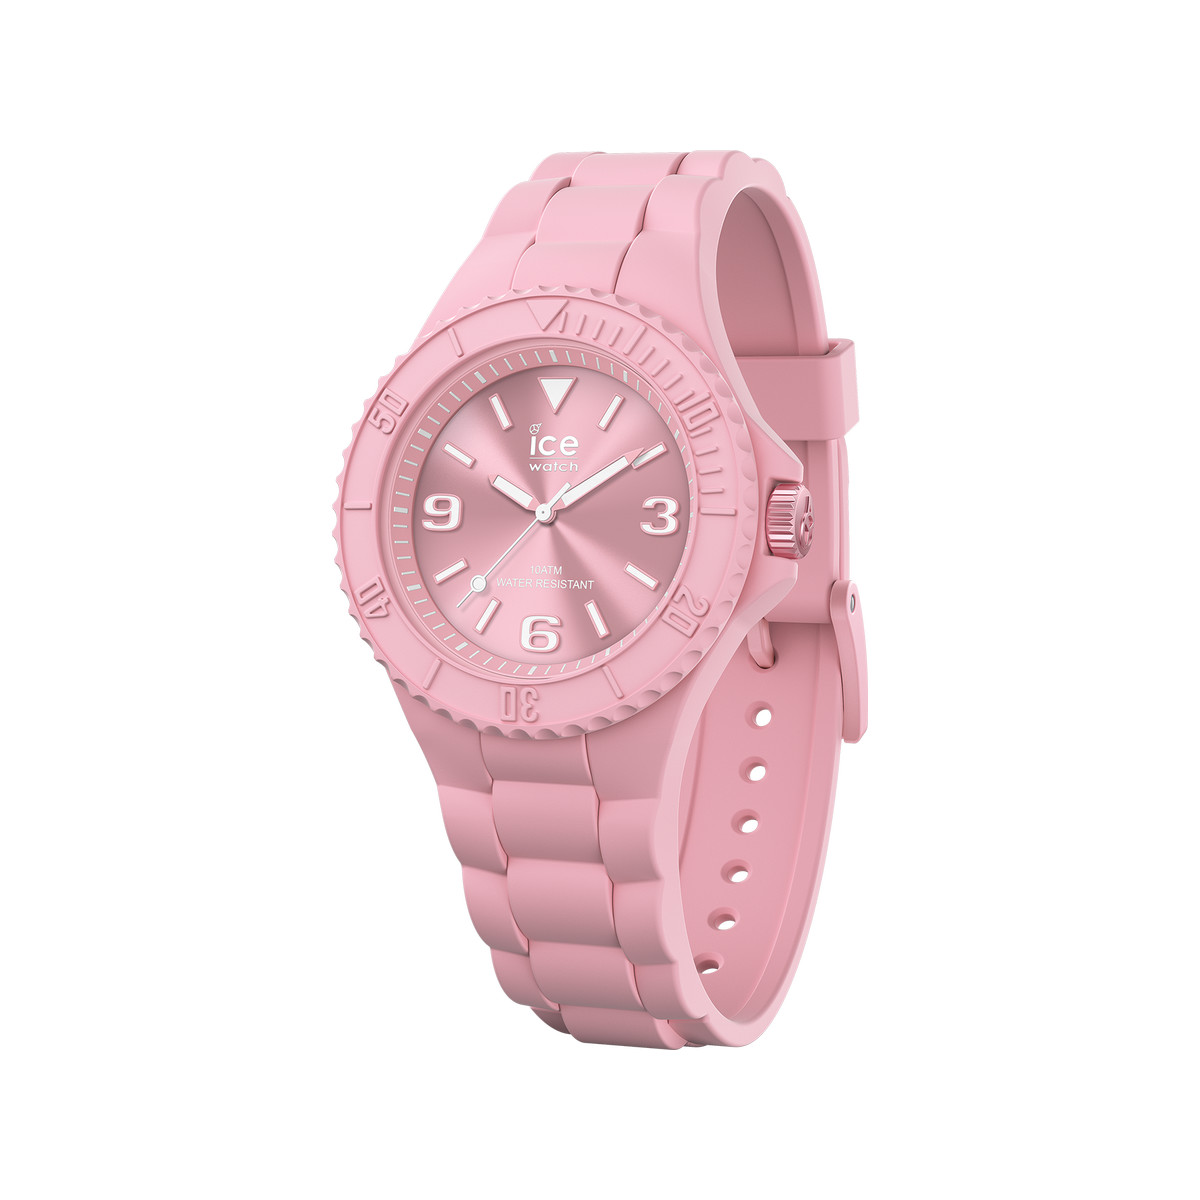 Montre Ice Watch small femme plastique silicone rose - vue 4